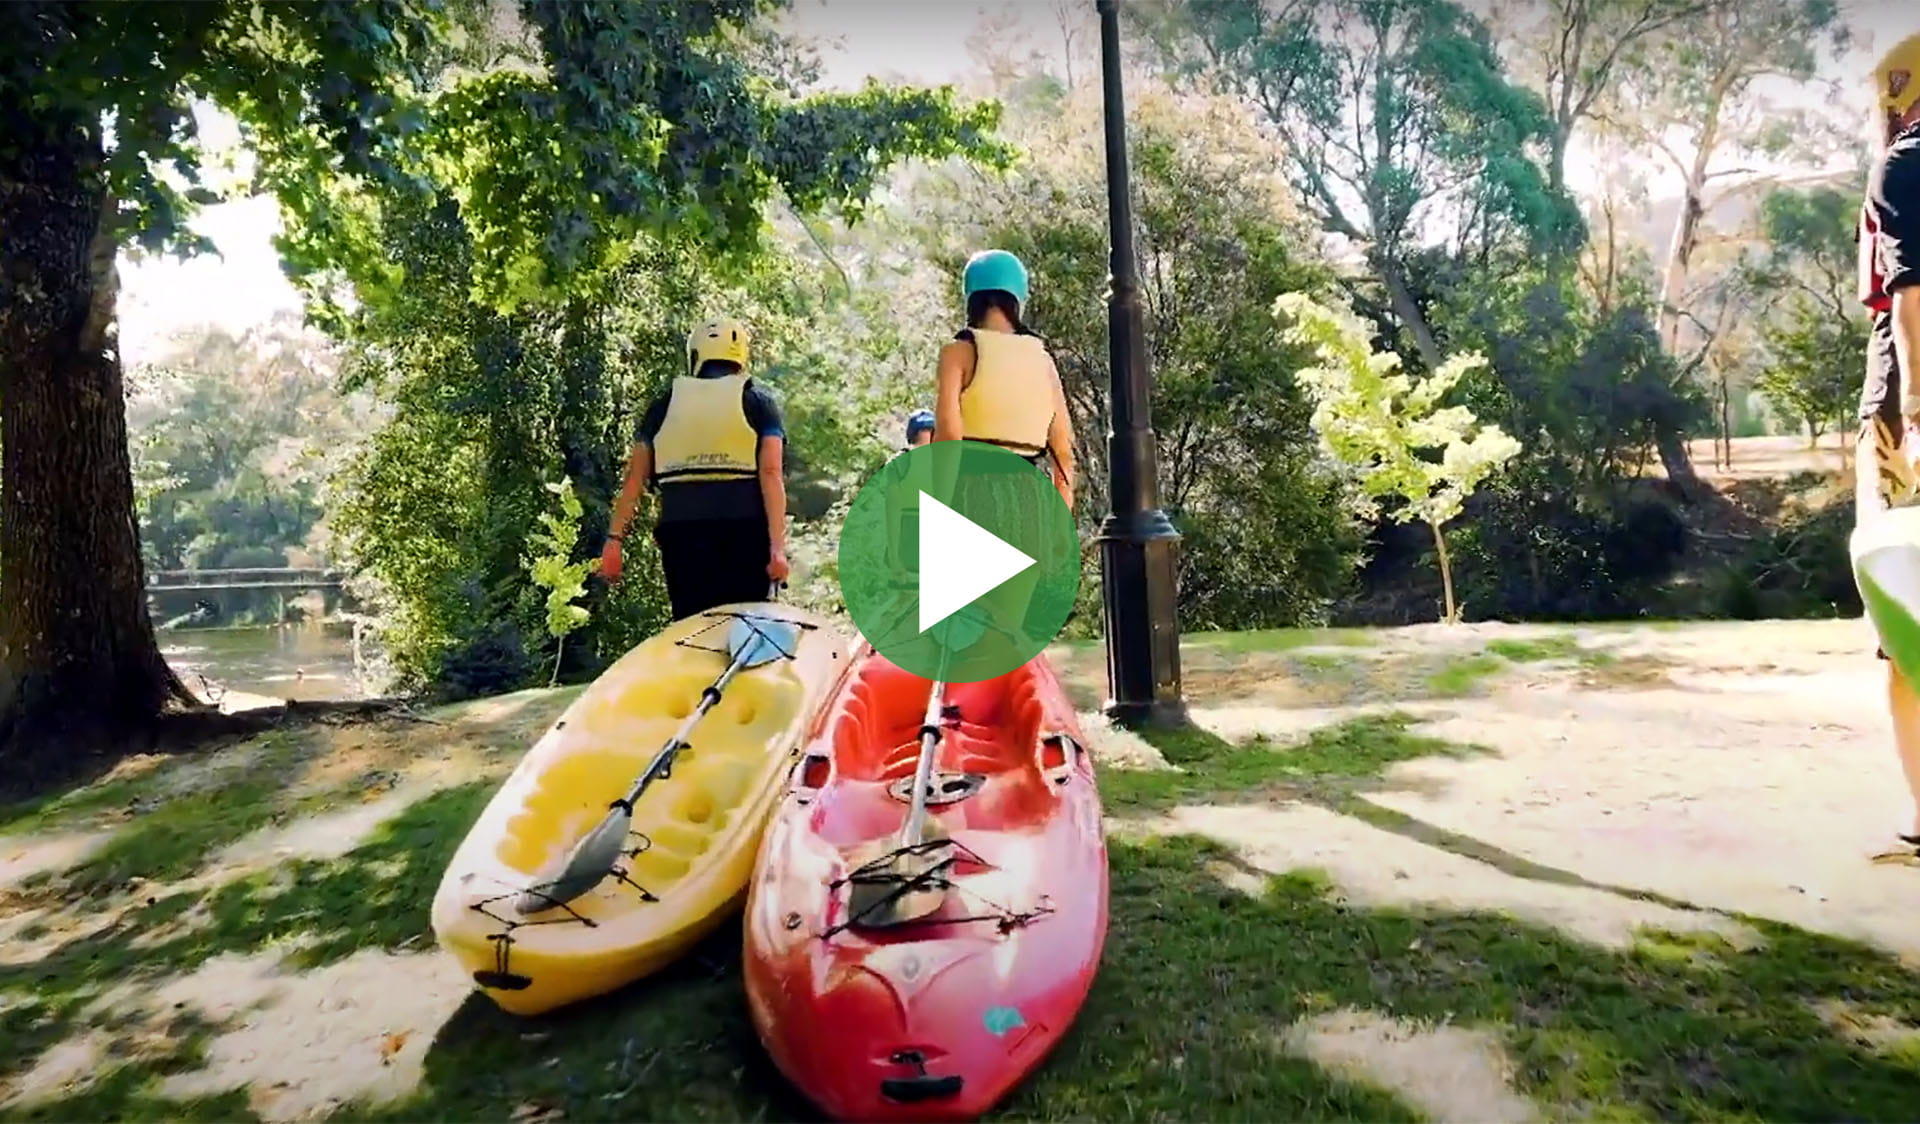 Still image from video of people pulling kayaks across grass with play icon overlay